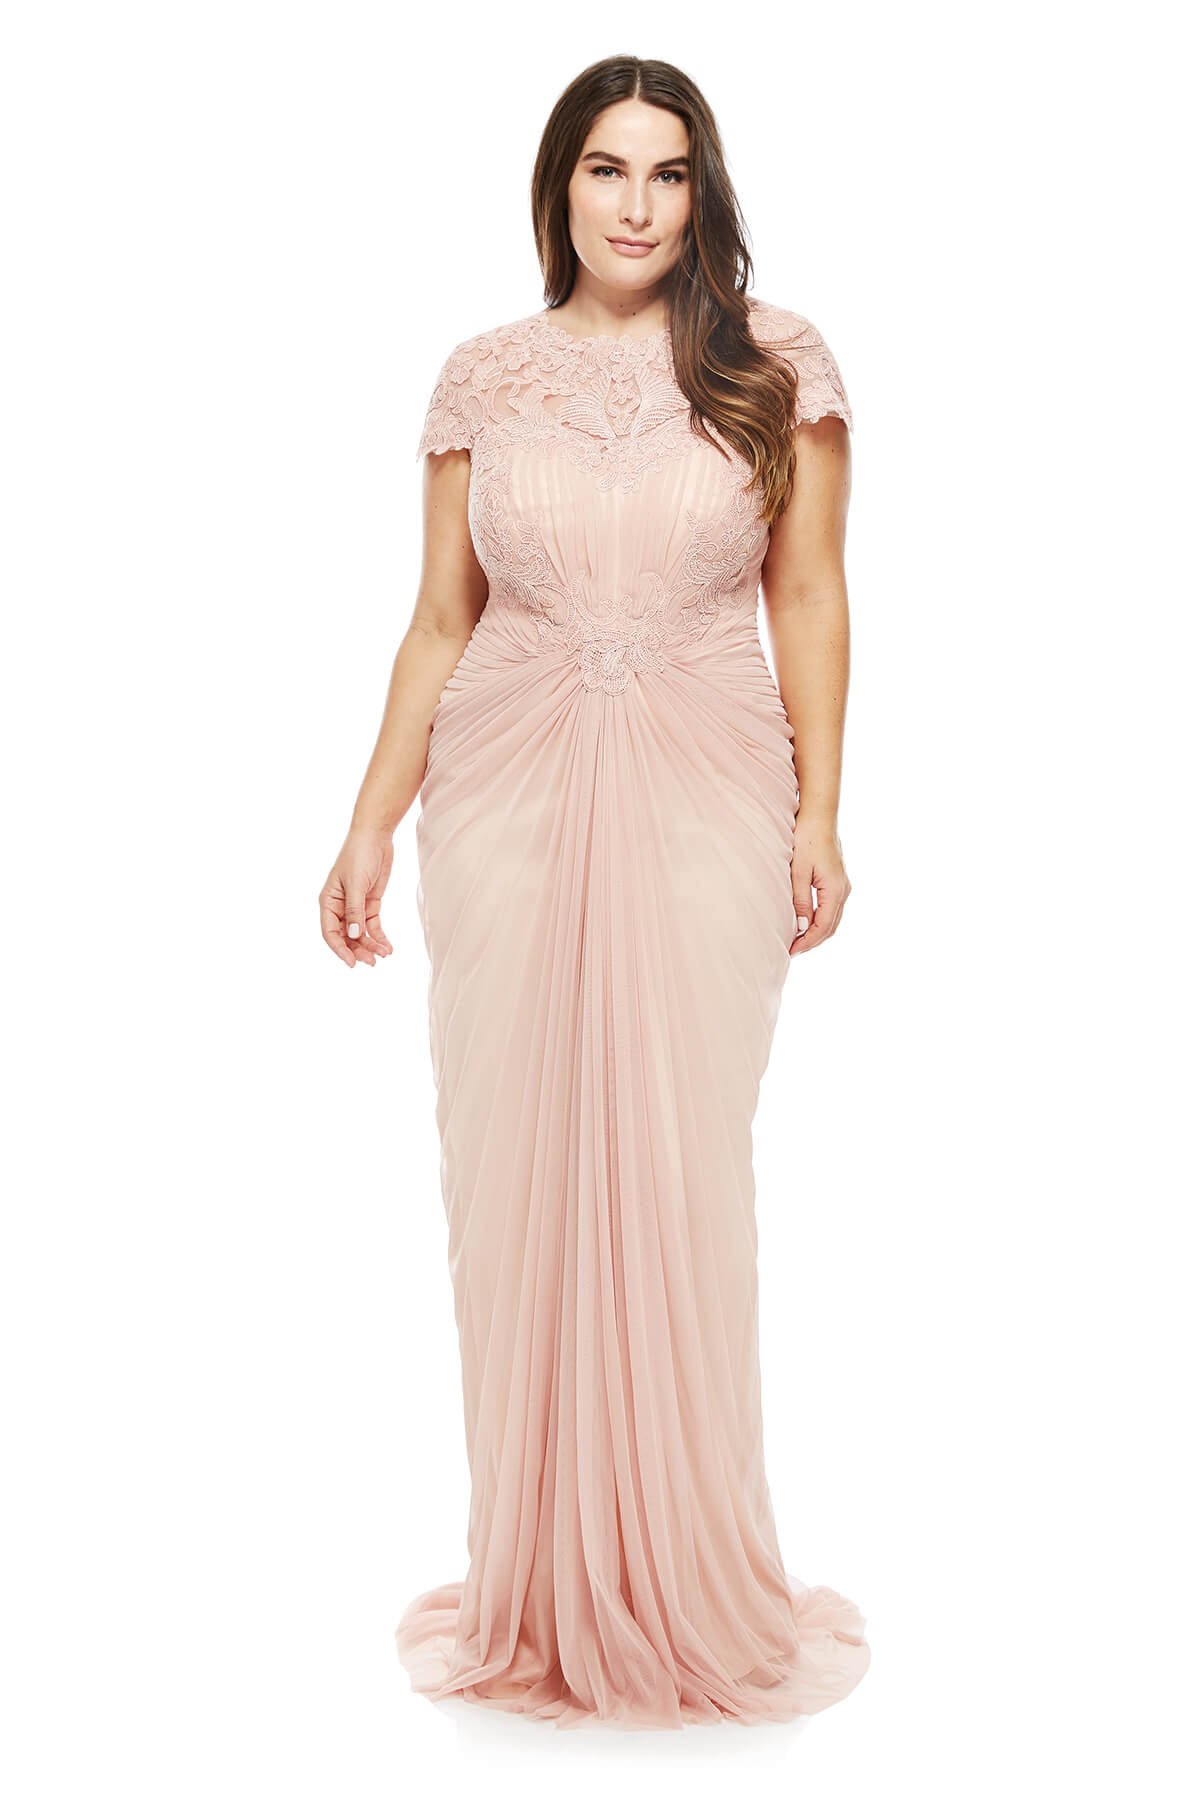 Plus-Size Dresses by Price, Cheap Plus Evening Gowns